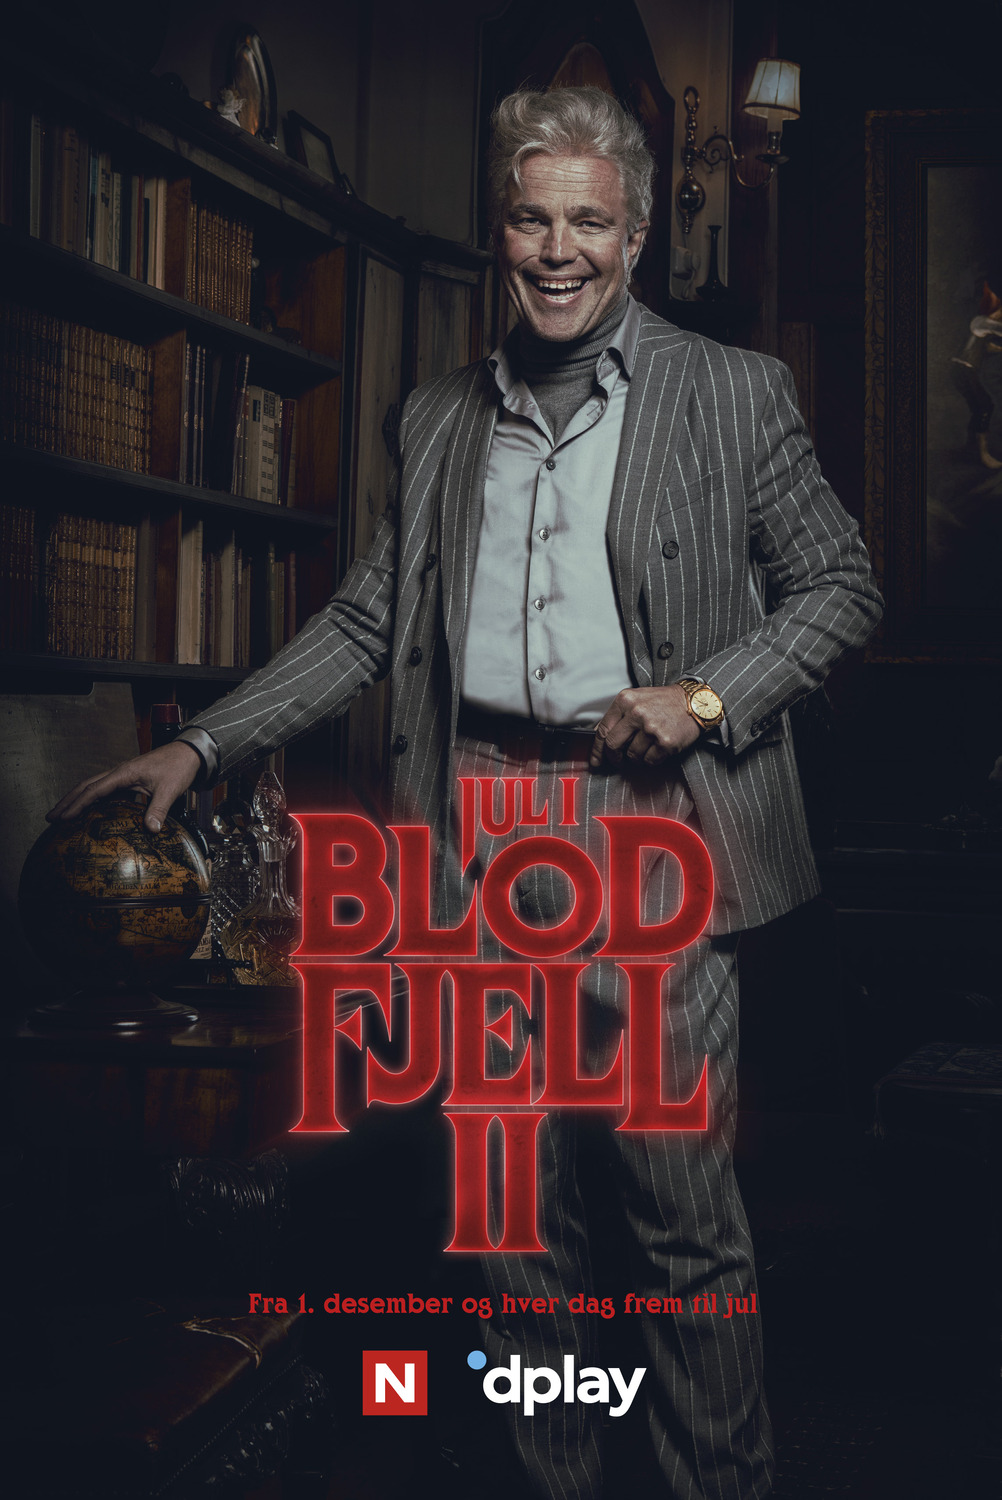 Extra Large TV Poster Image for Jul i Blodfjell (#7 of 11)